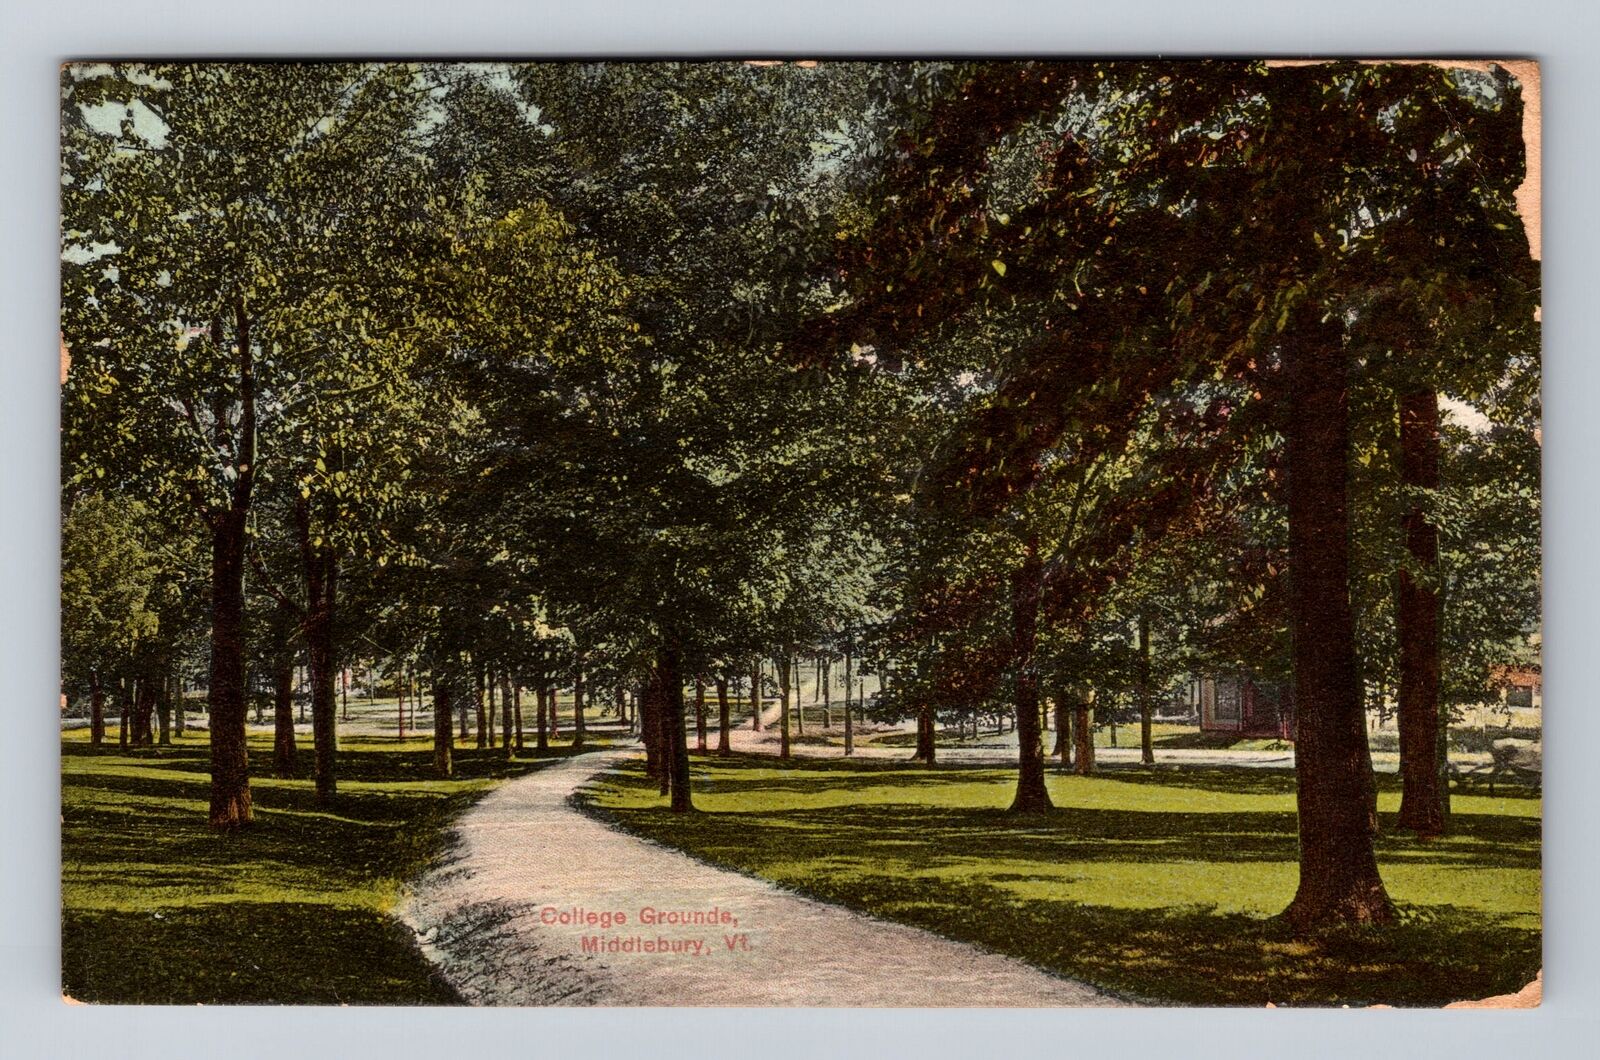 Middlebury VT-Vermont, Middlebury College Campus Grounds, Vintage Postcard